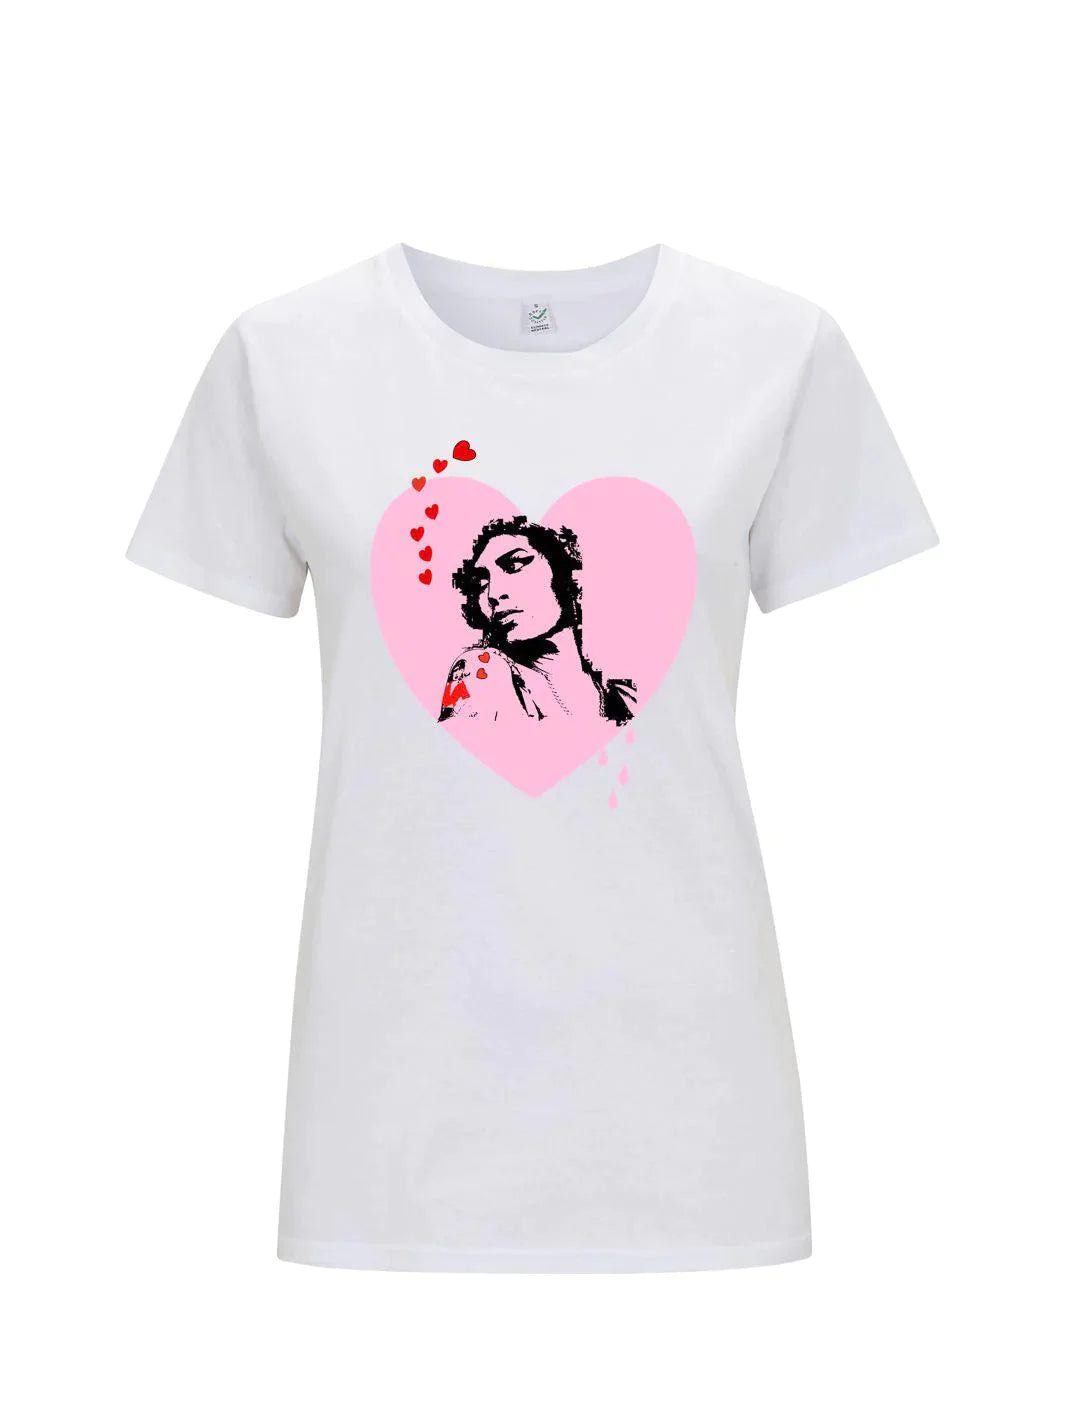 LOVE: Female Cut T-Shirt Inspired by Amy Winehouse - SOUND IS COLOUR